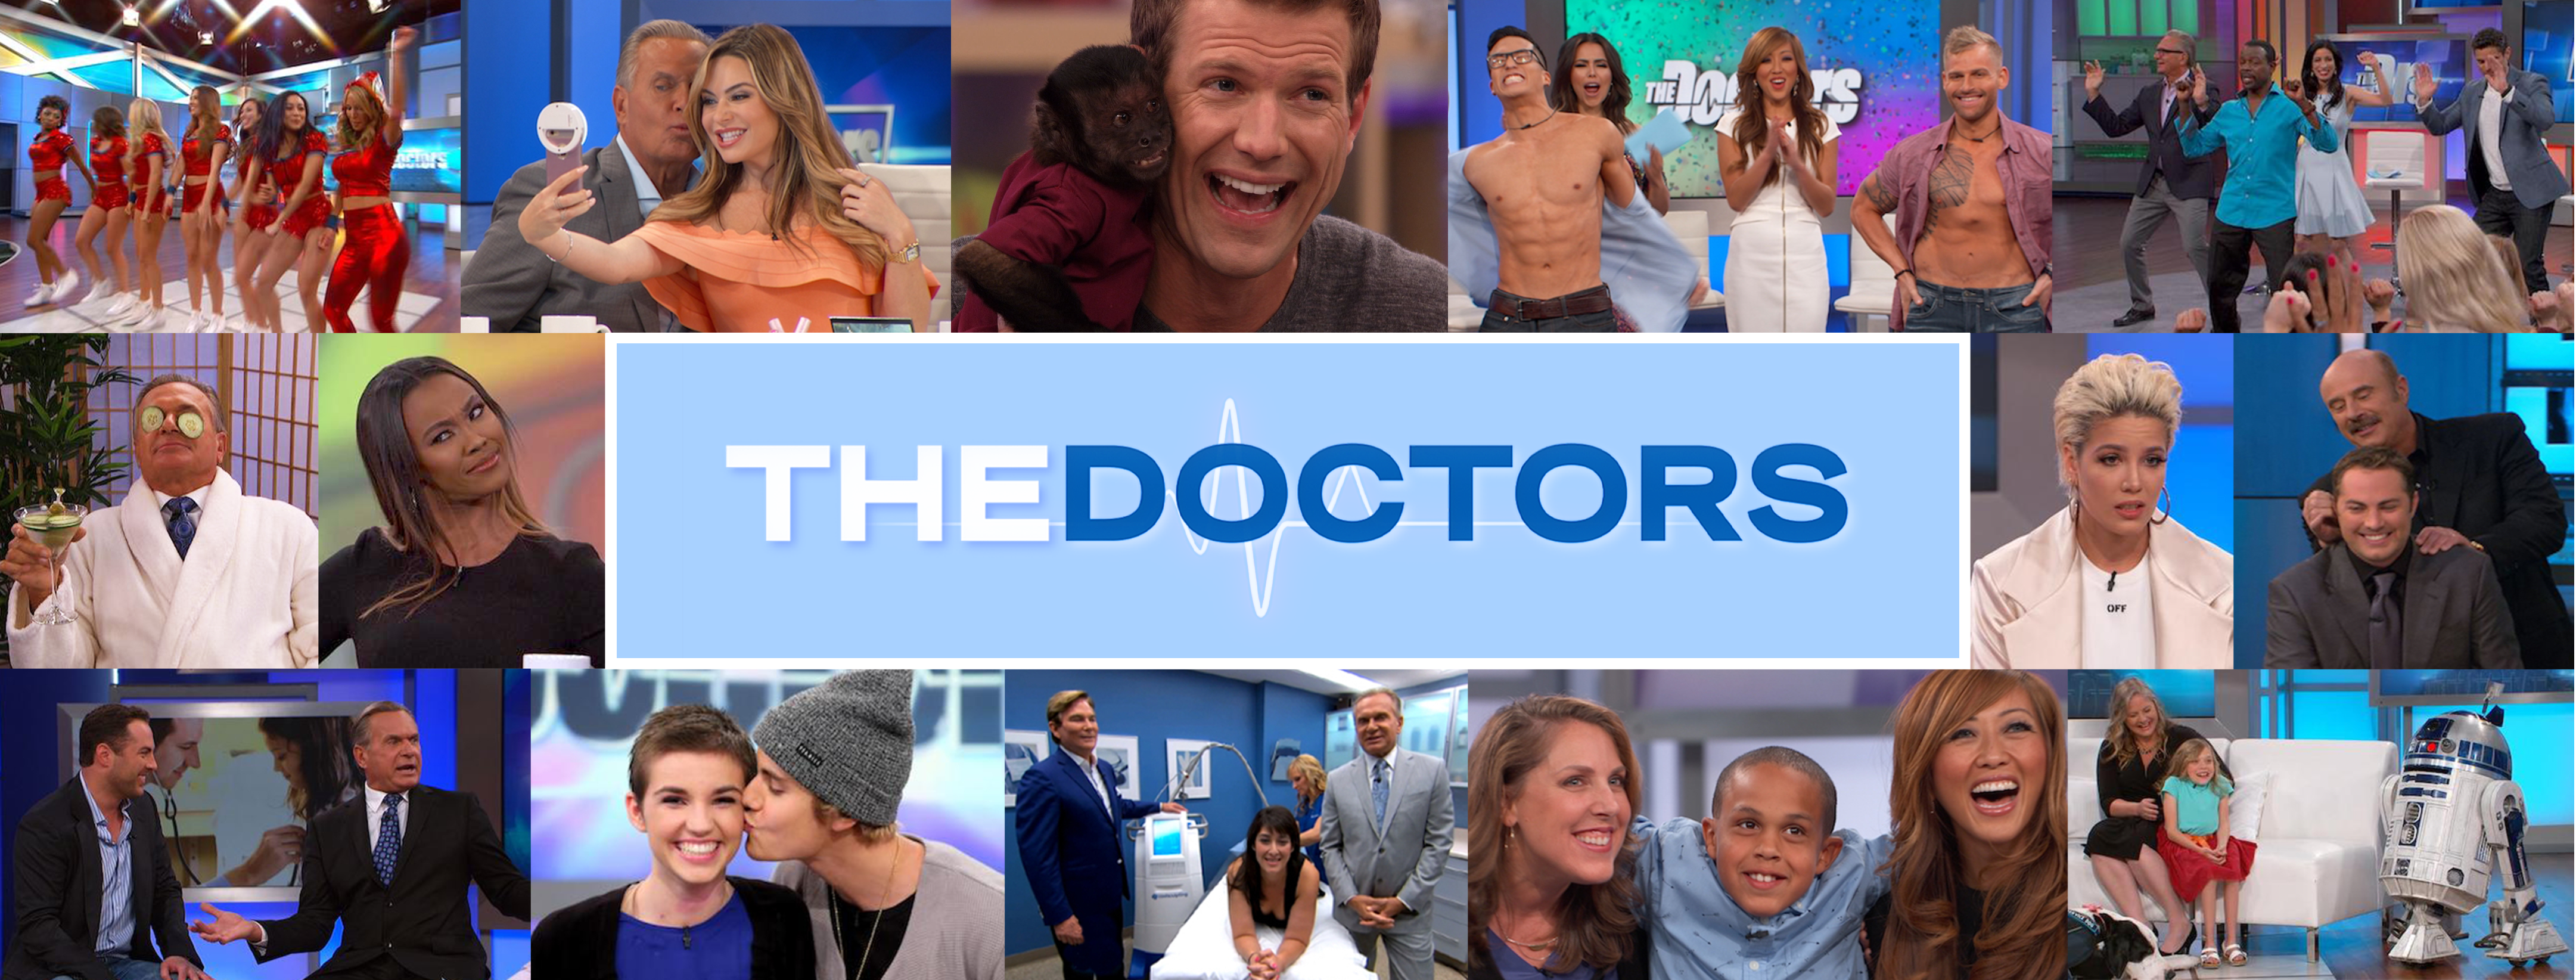 The Doctors panel in front of screen with image of a cockroach